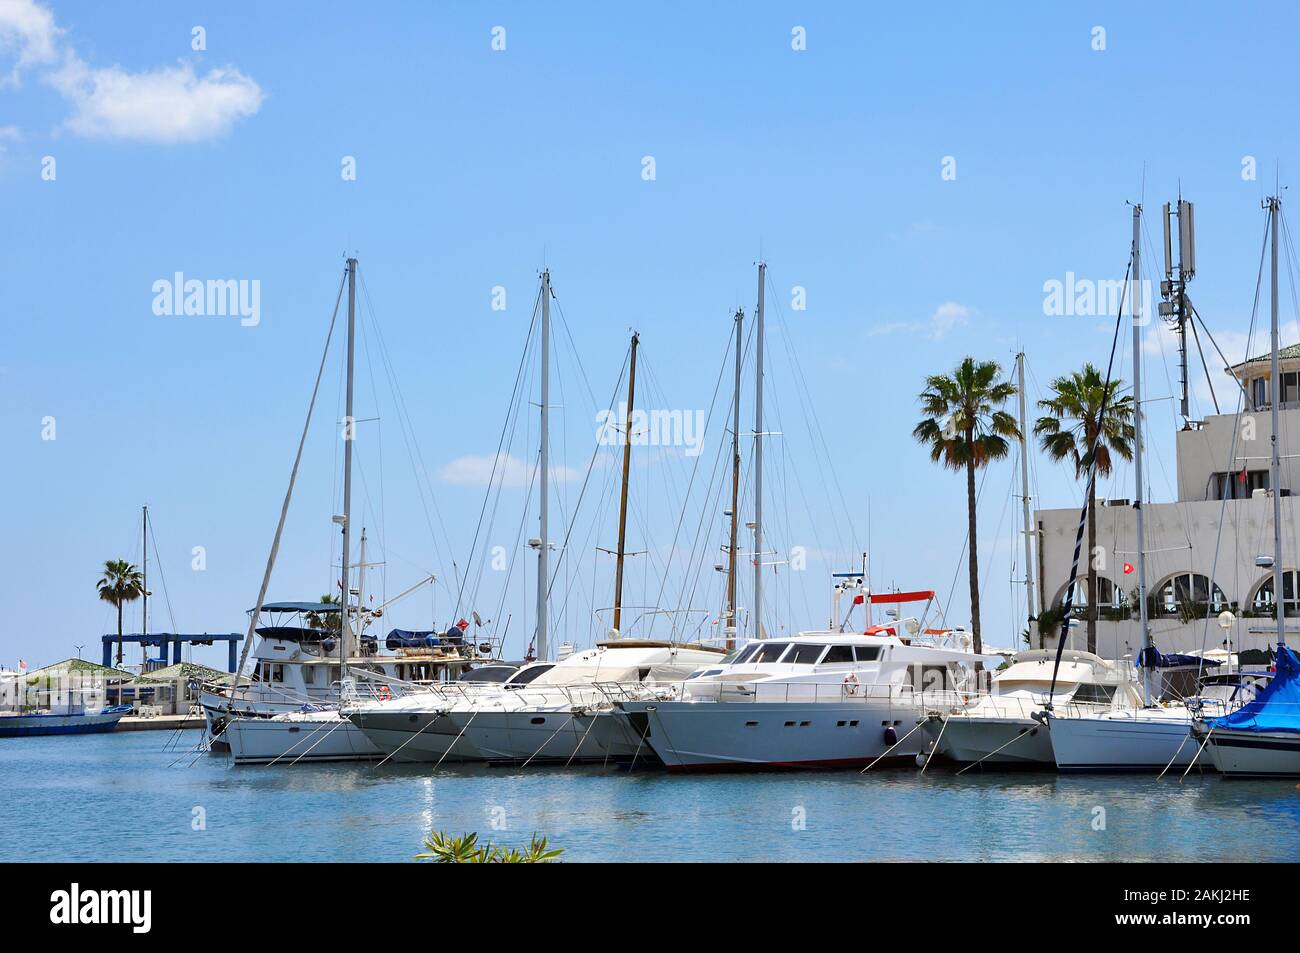 Several yachts moored in Port El Kantaoui marina in sunny day Stock Photo